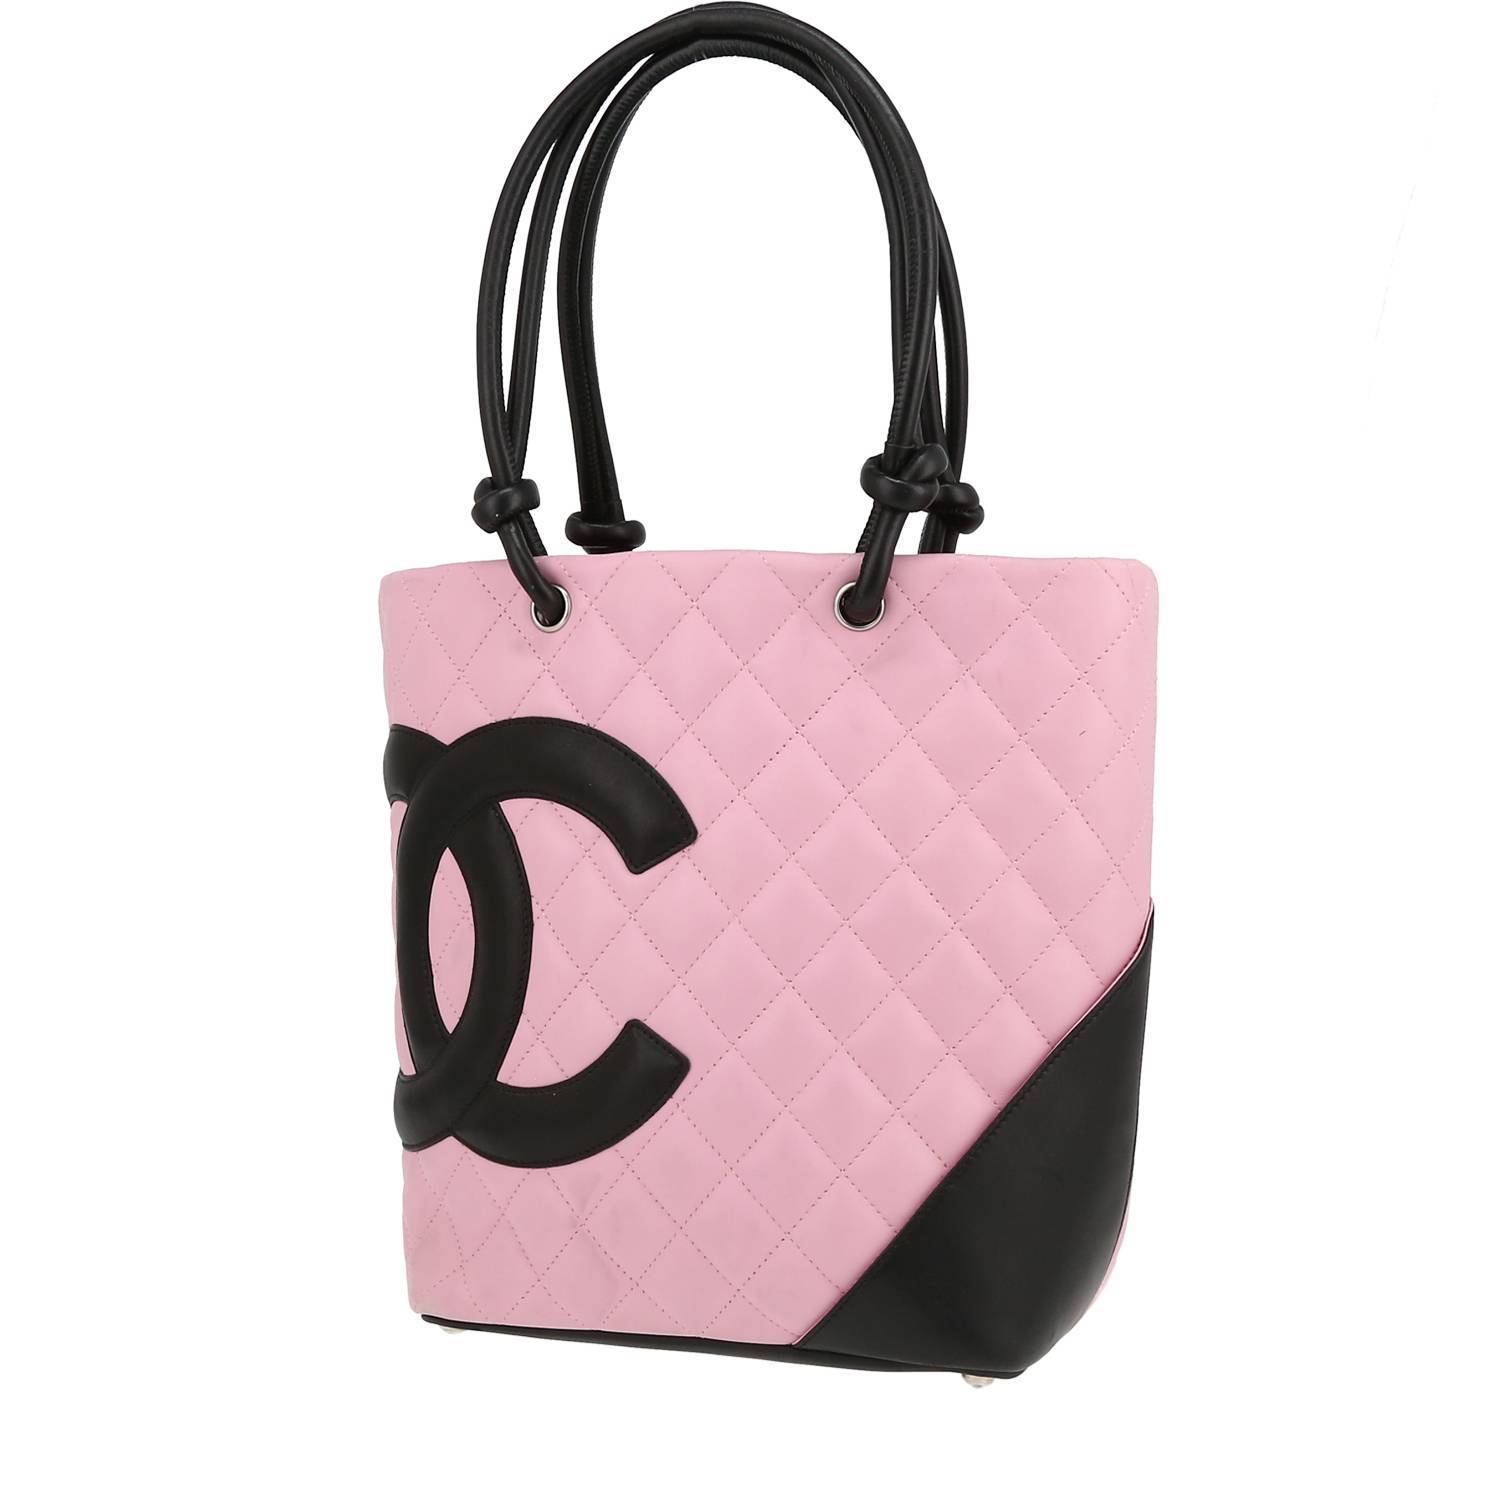 Chanel Cambon handbag in beige and black quilted leather